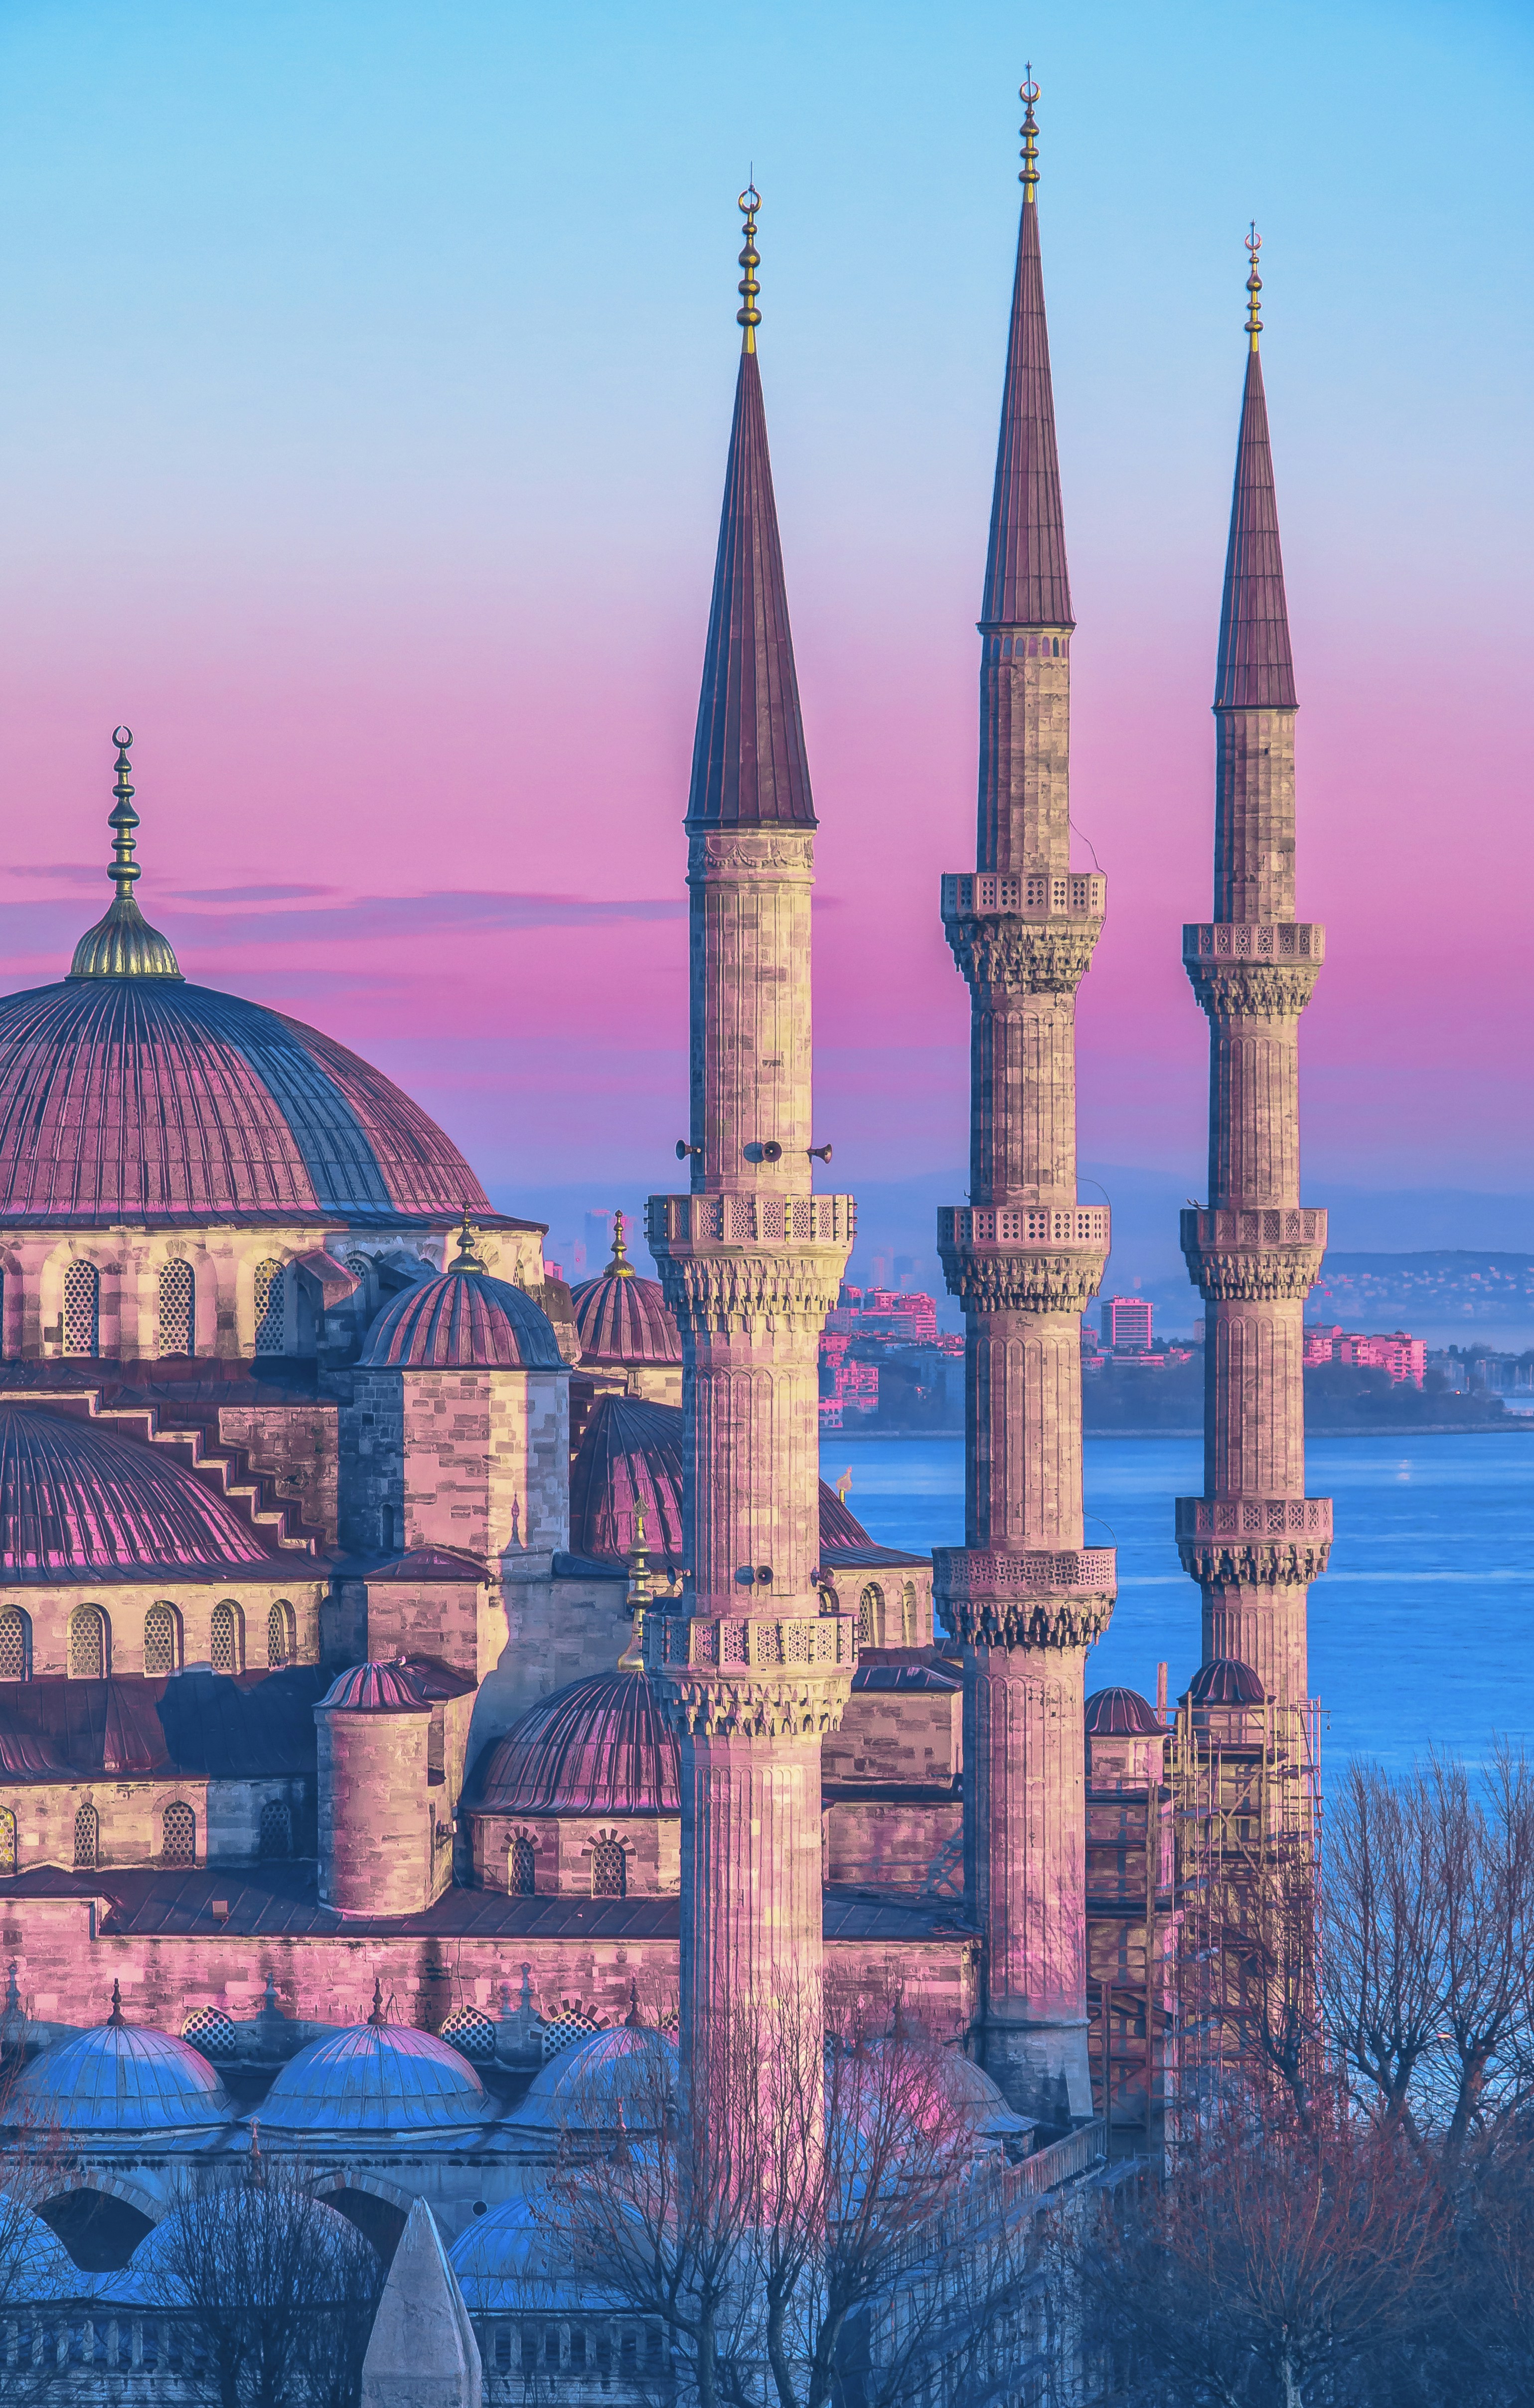 Turkey: A Country Rich in Travel Magic